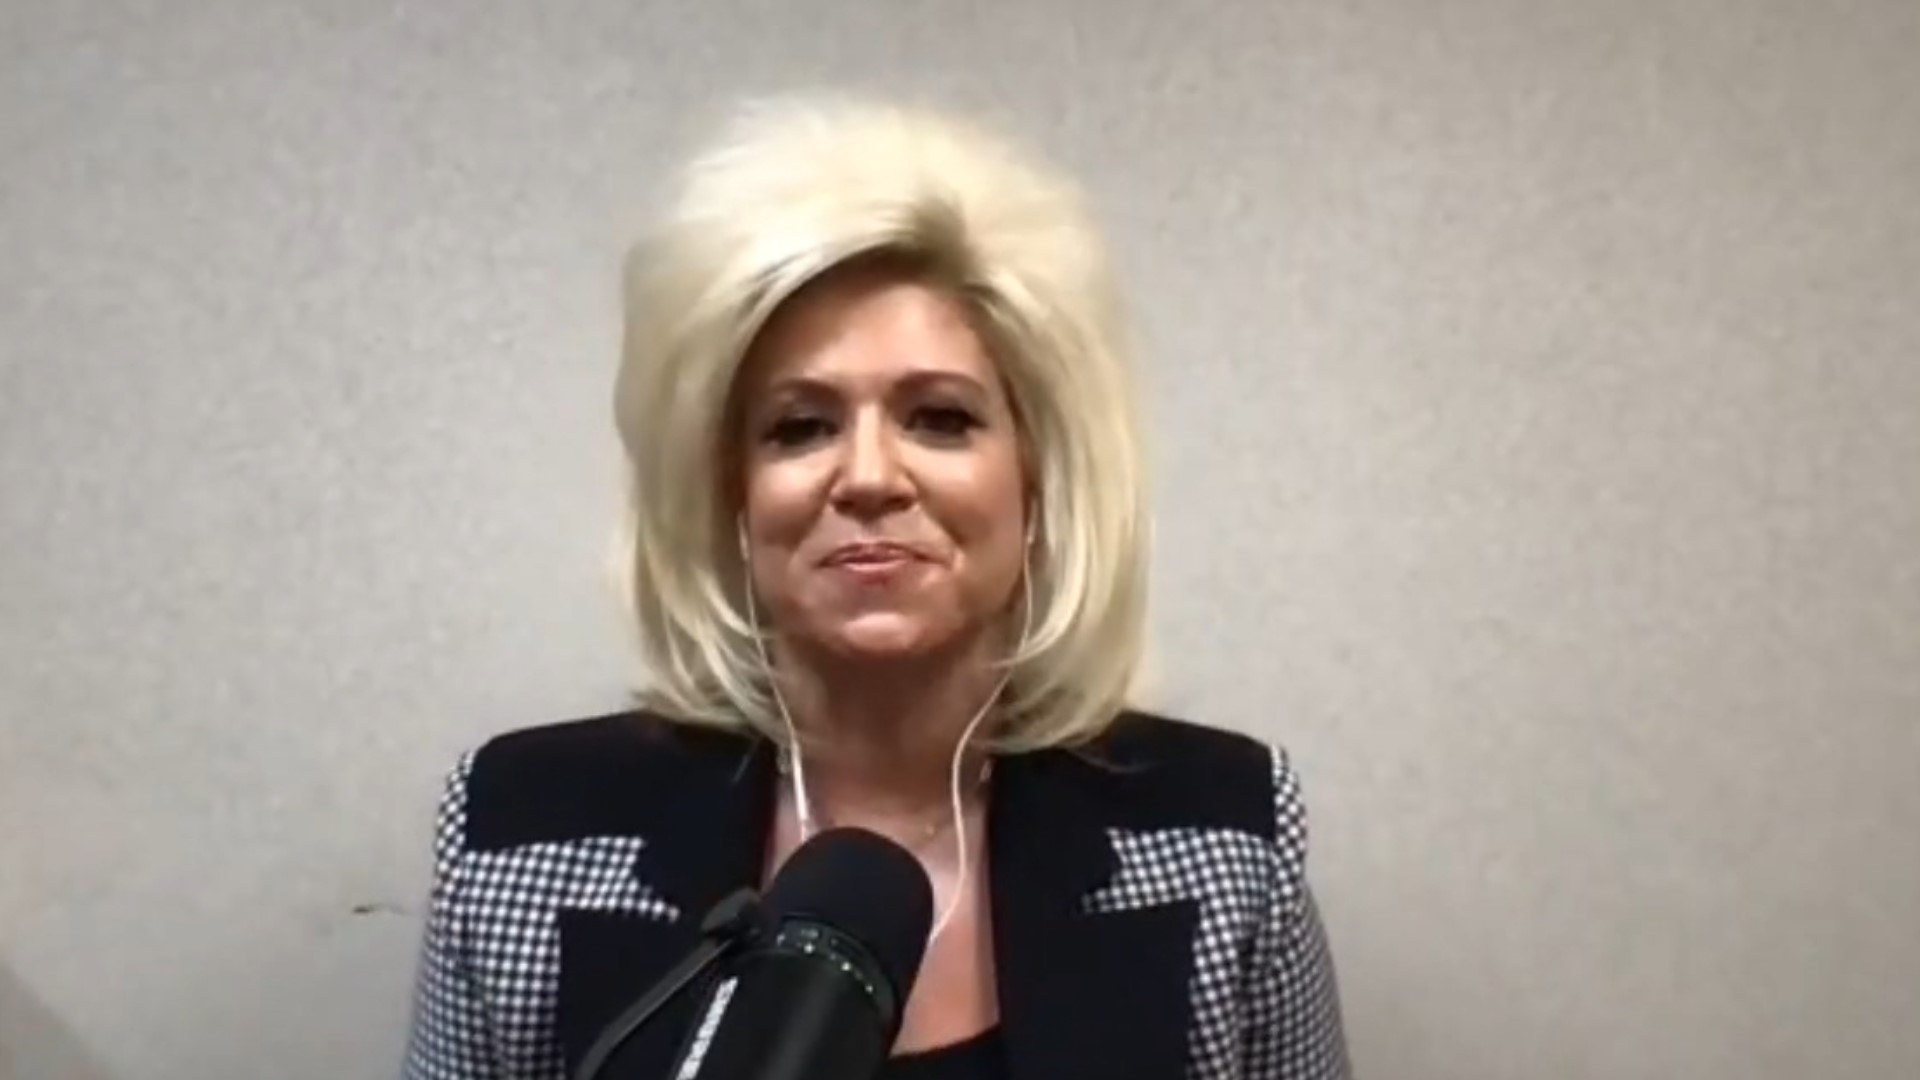 "Theresa Caputo Live! The Experience" will make a stop at Ford Park arena Wednesday, Oct. 20 at 7:30 p.m.